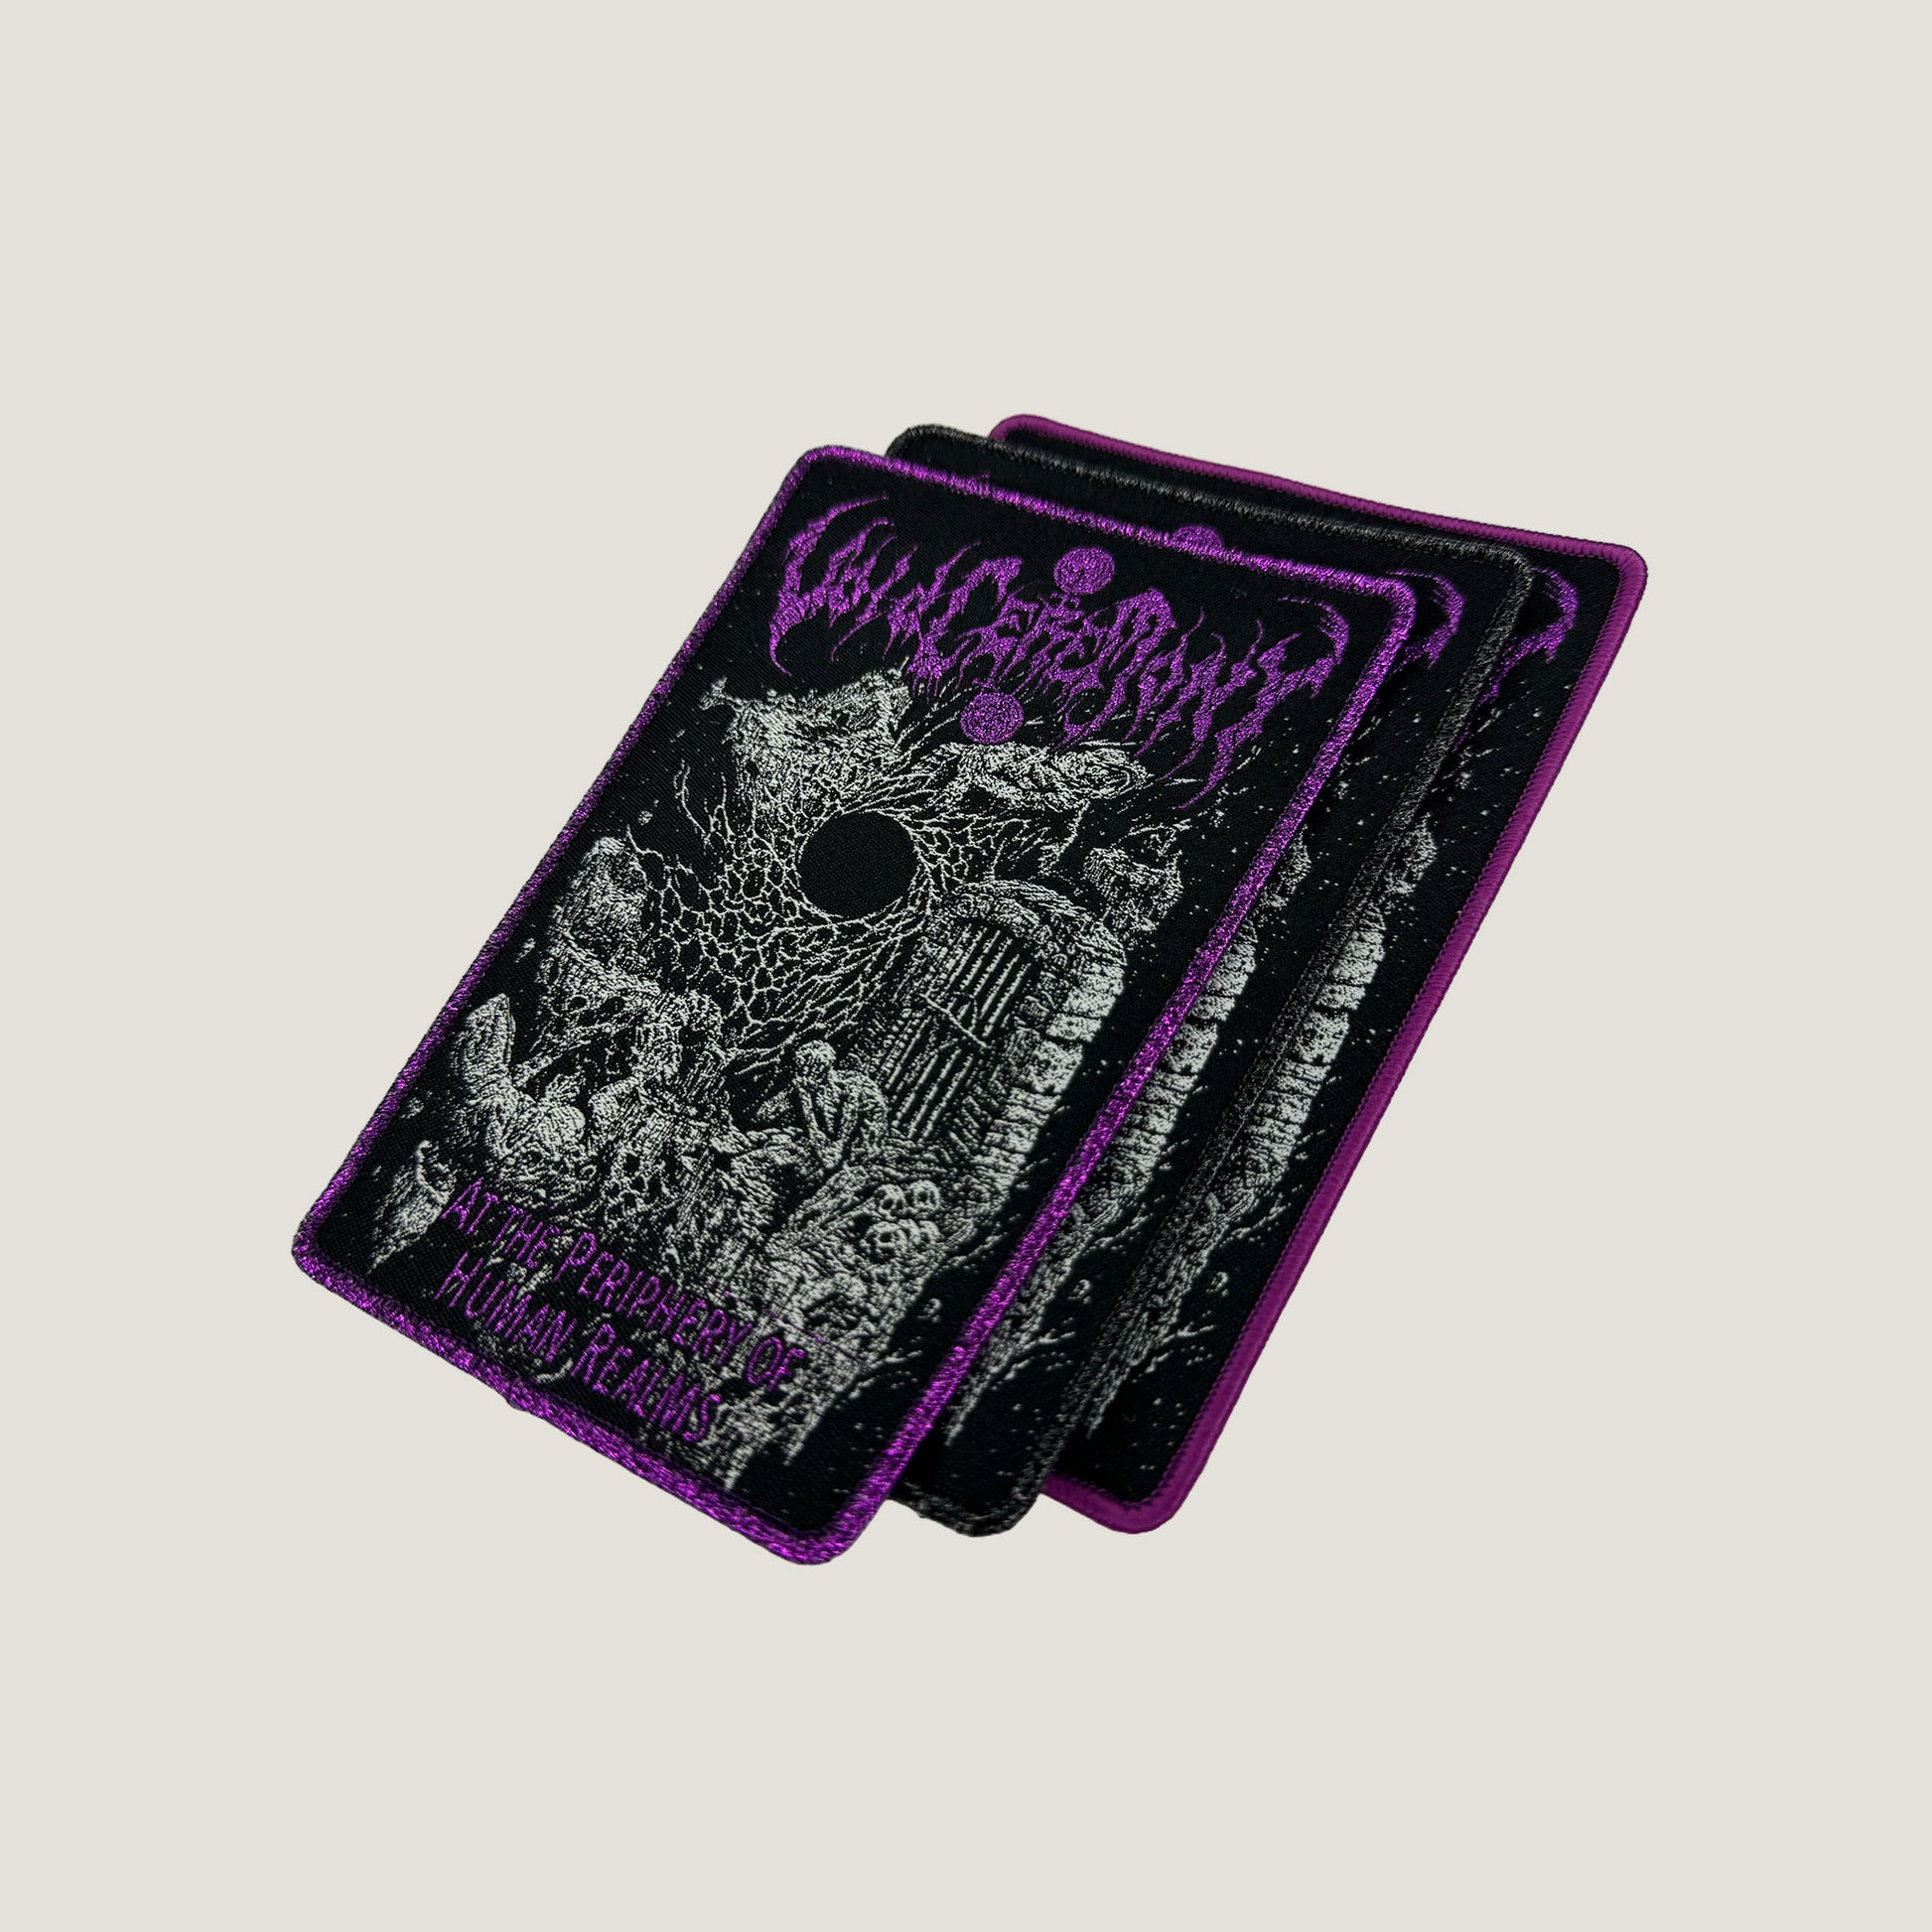 Temporal Dimensions Patches VoidCeremony At the Periphery of Human Realms Metal Woven Patches